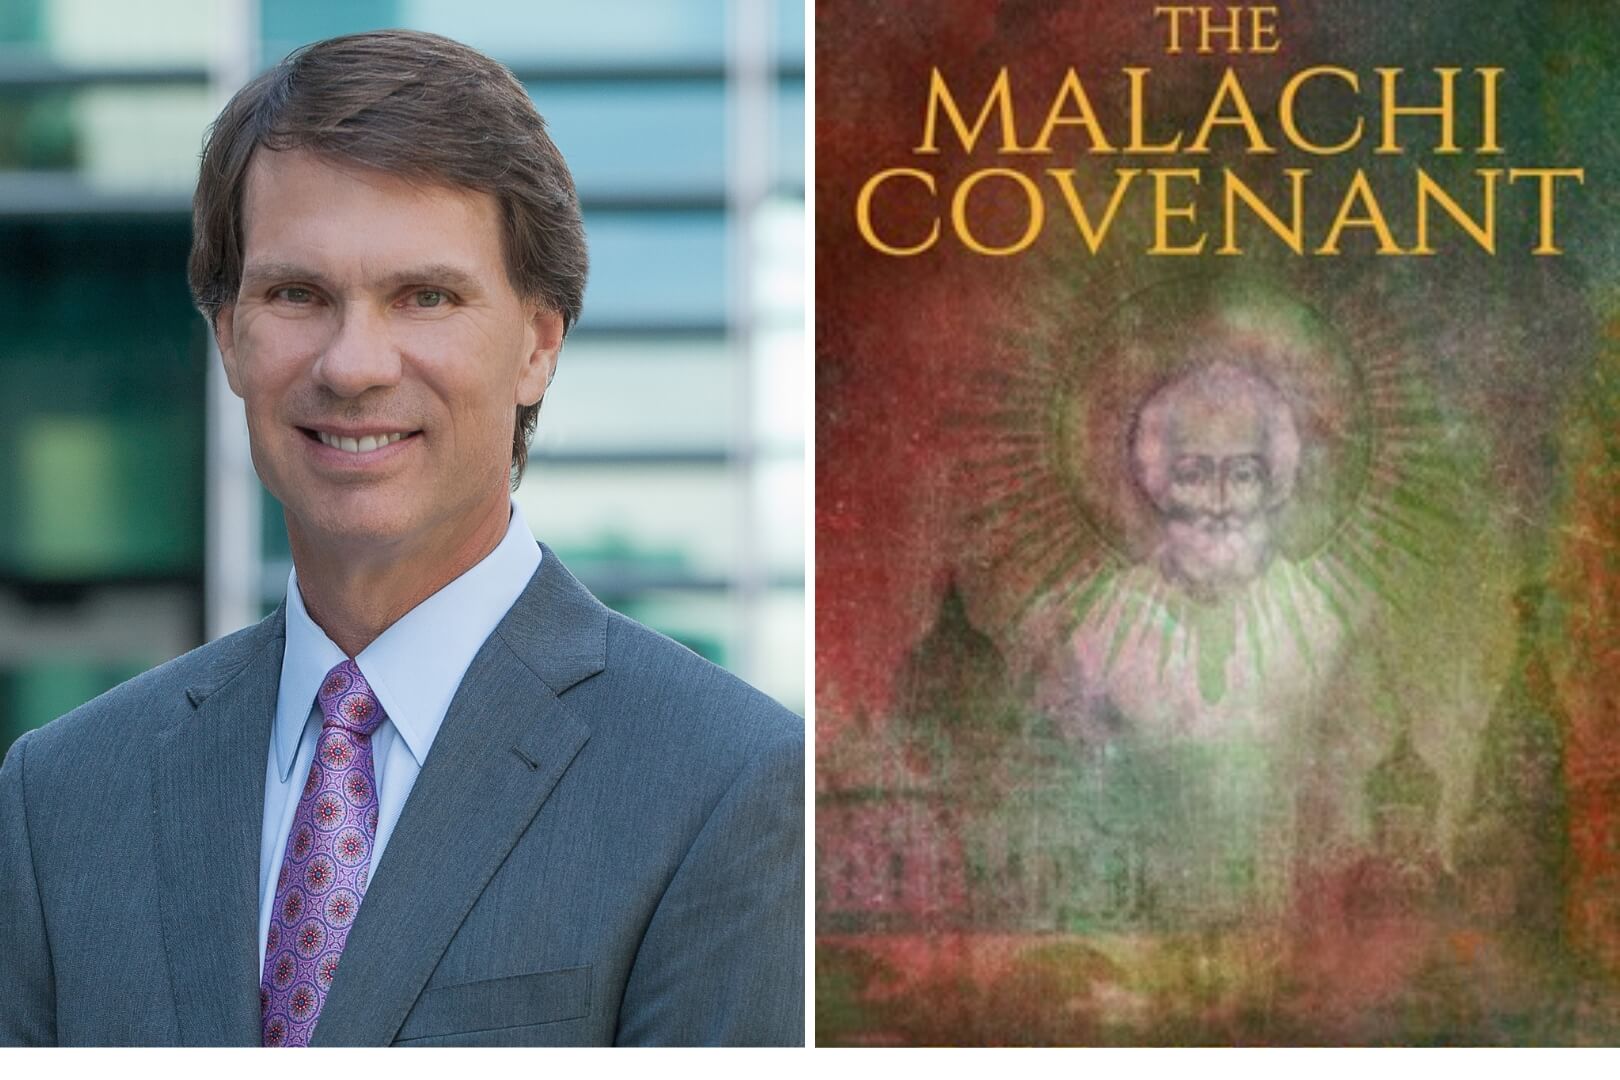 Q&A with Dee Kelly, Author of The Malachi Covenant